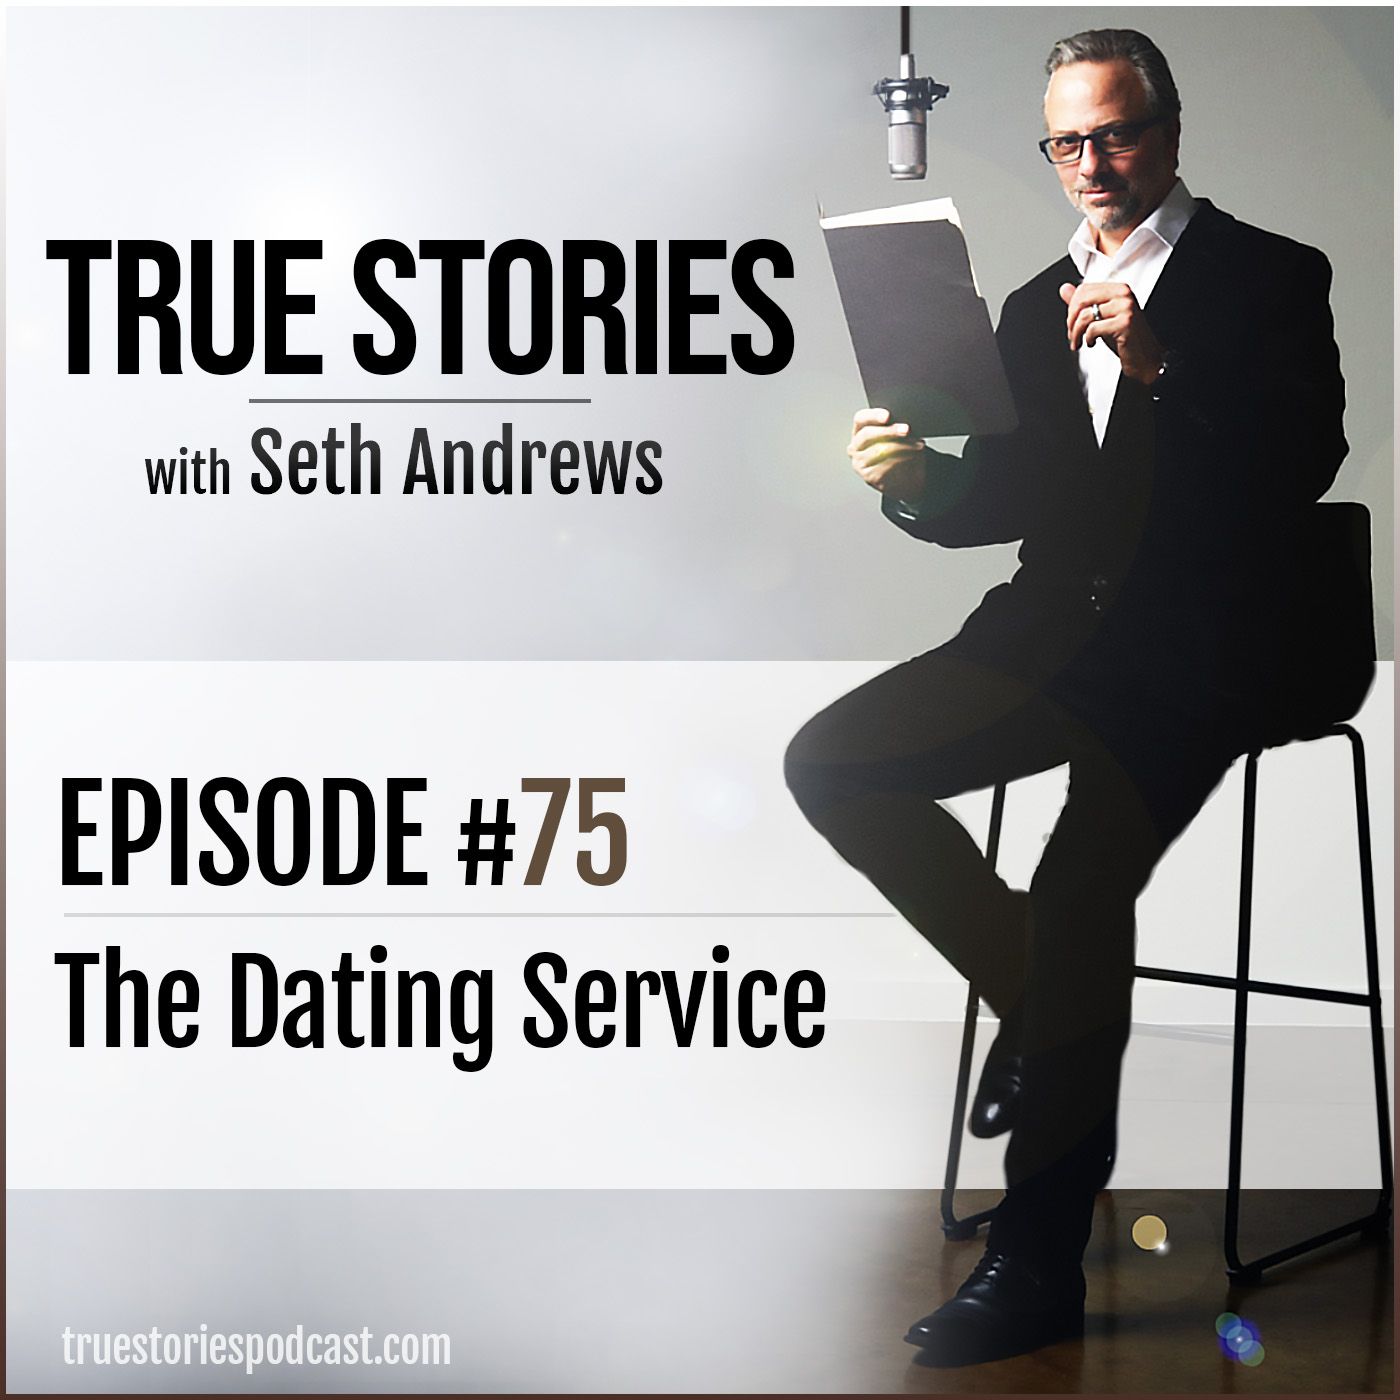 True Stories #75 - The Dating Service